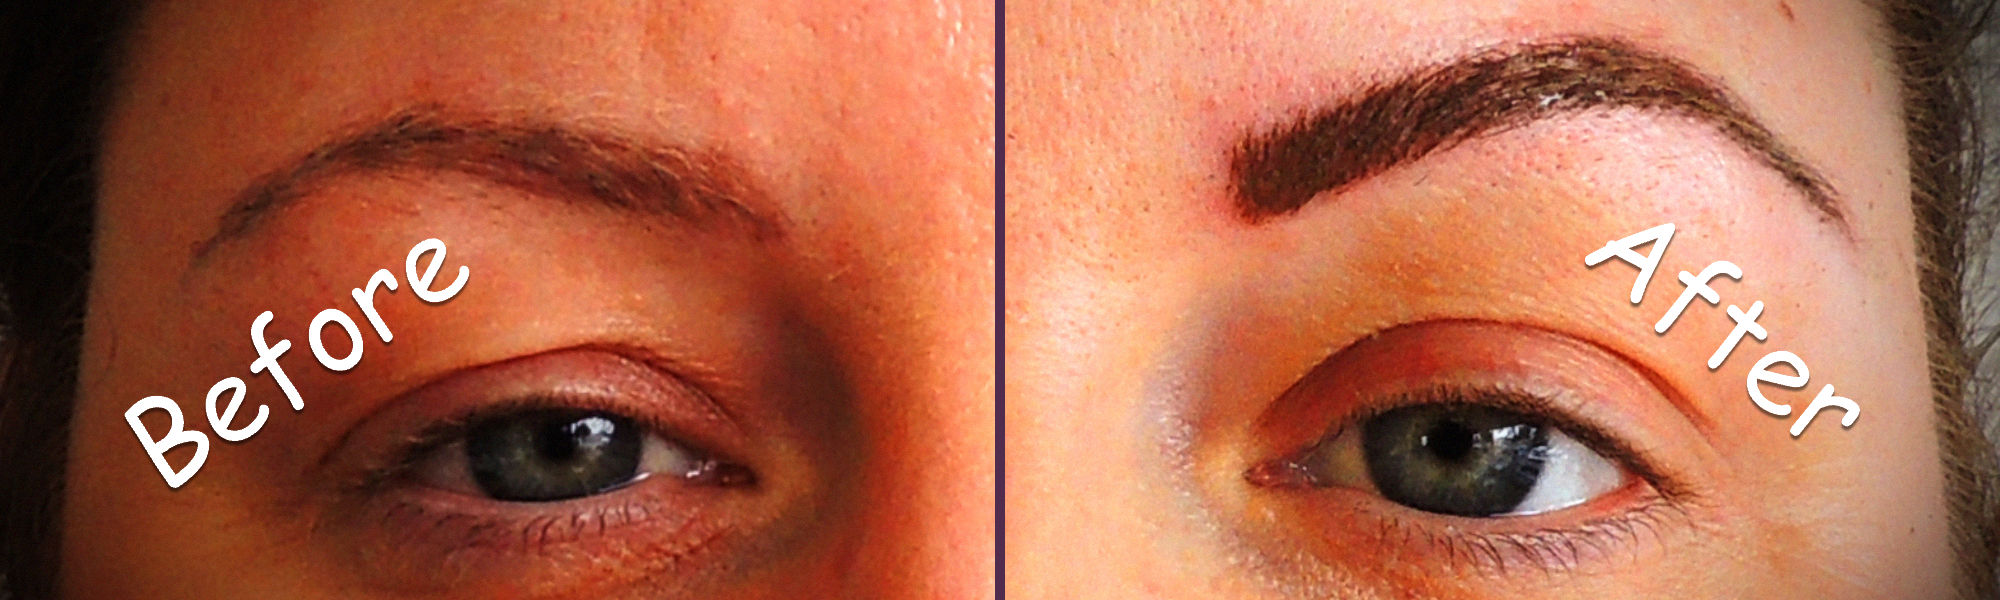 microblading eyebrows before and after